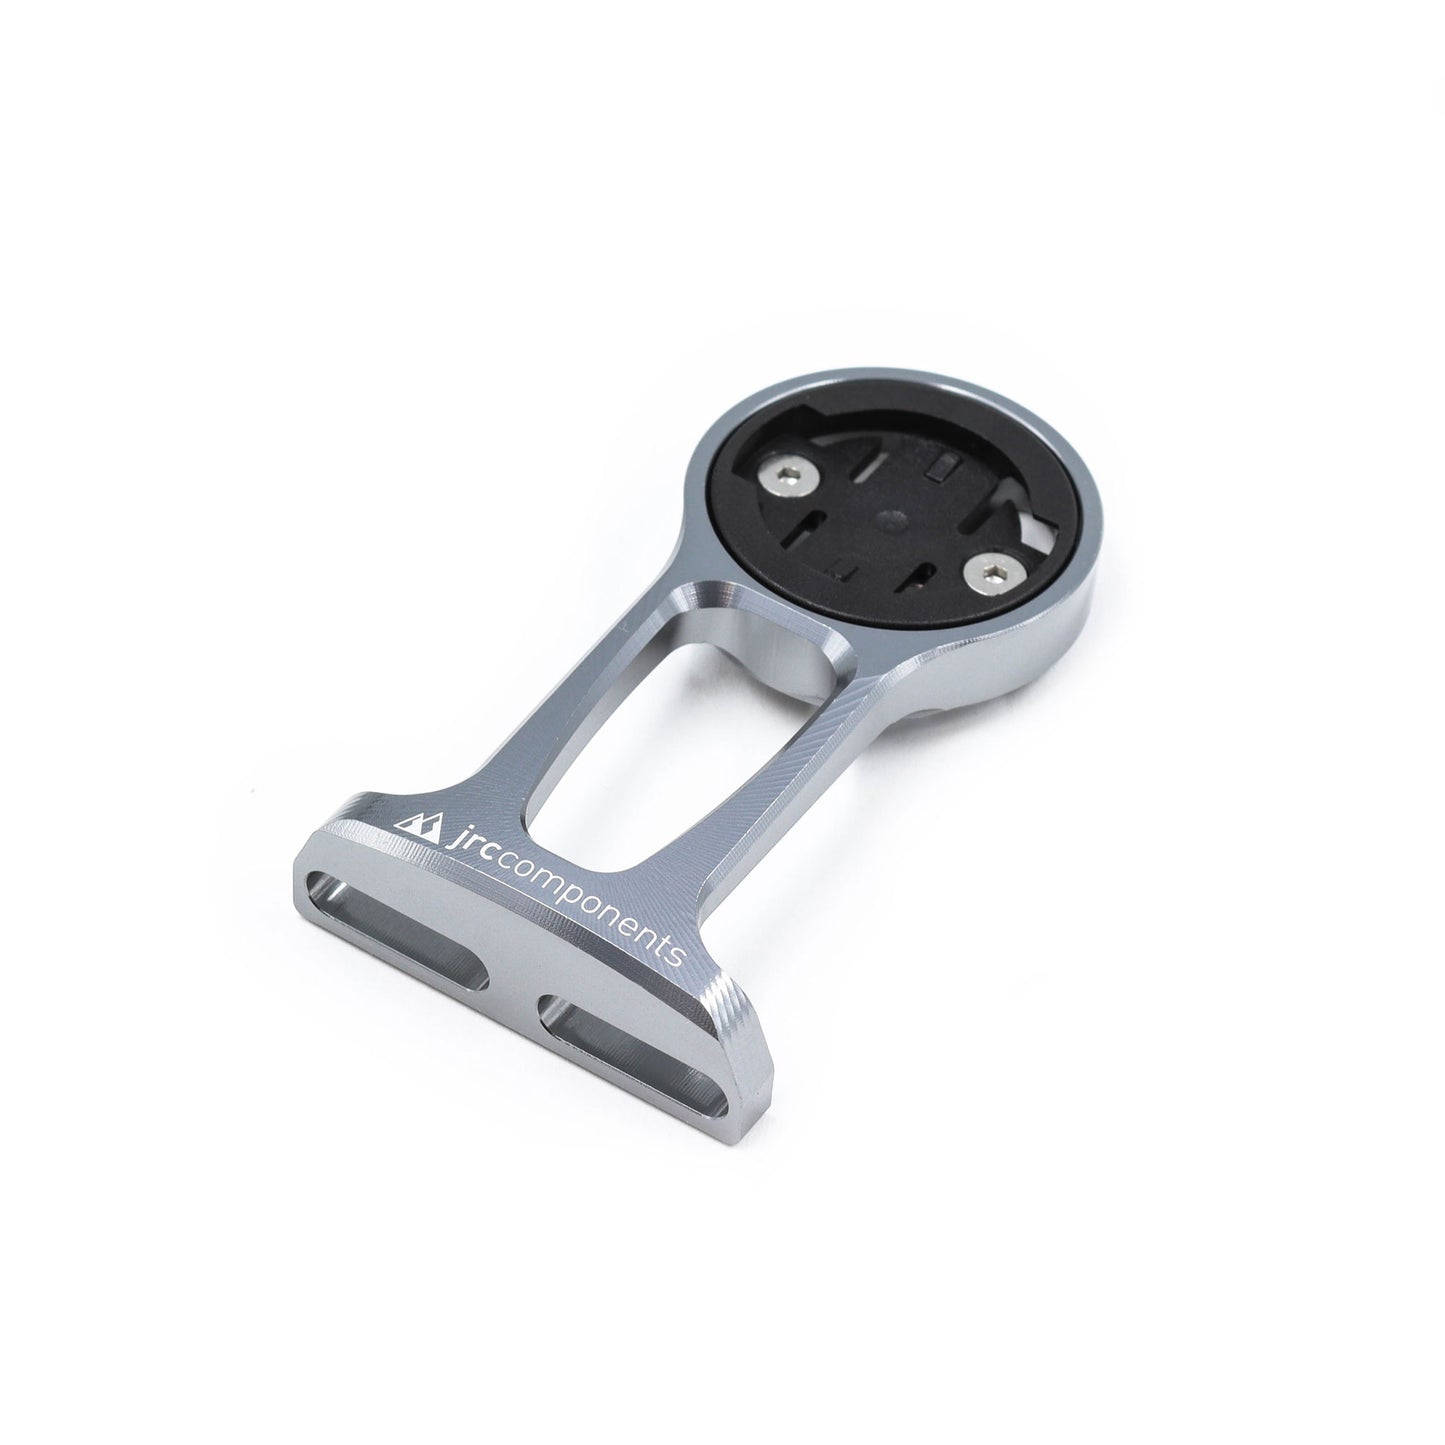 Gunmetal grey, lightweight aluminium stem out front GPS computer mount for bicycle, compatible with Wahoo